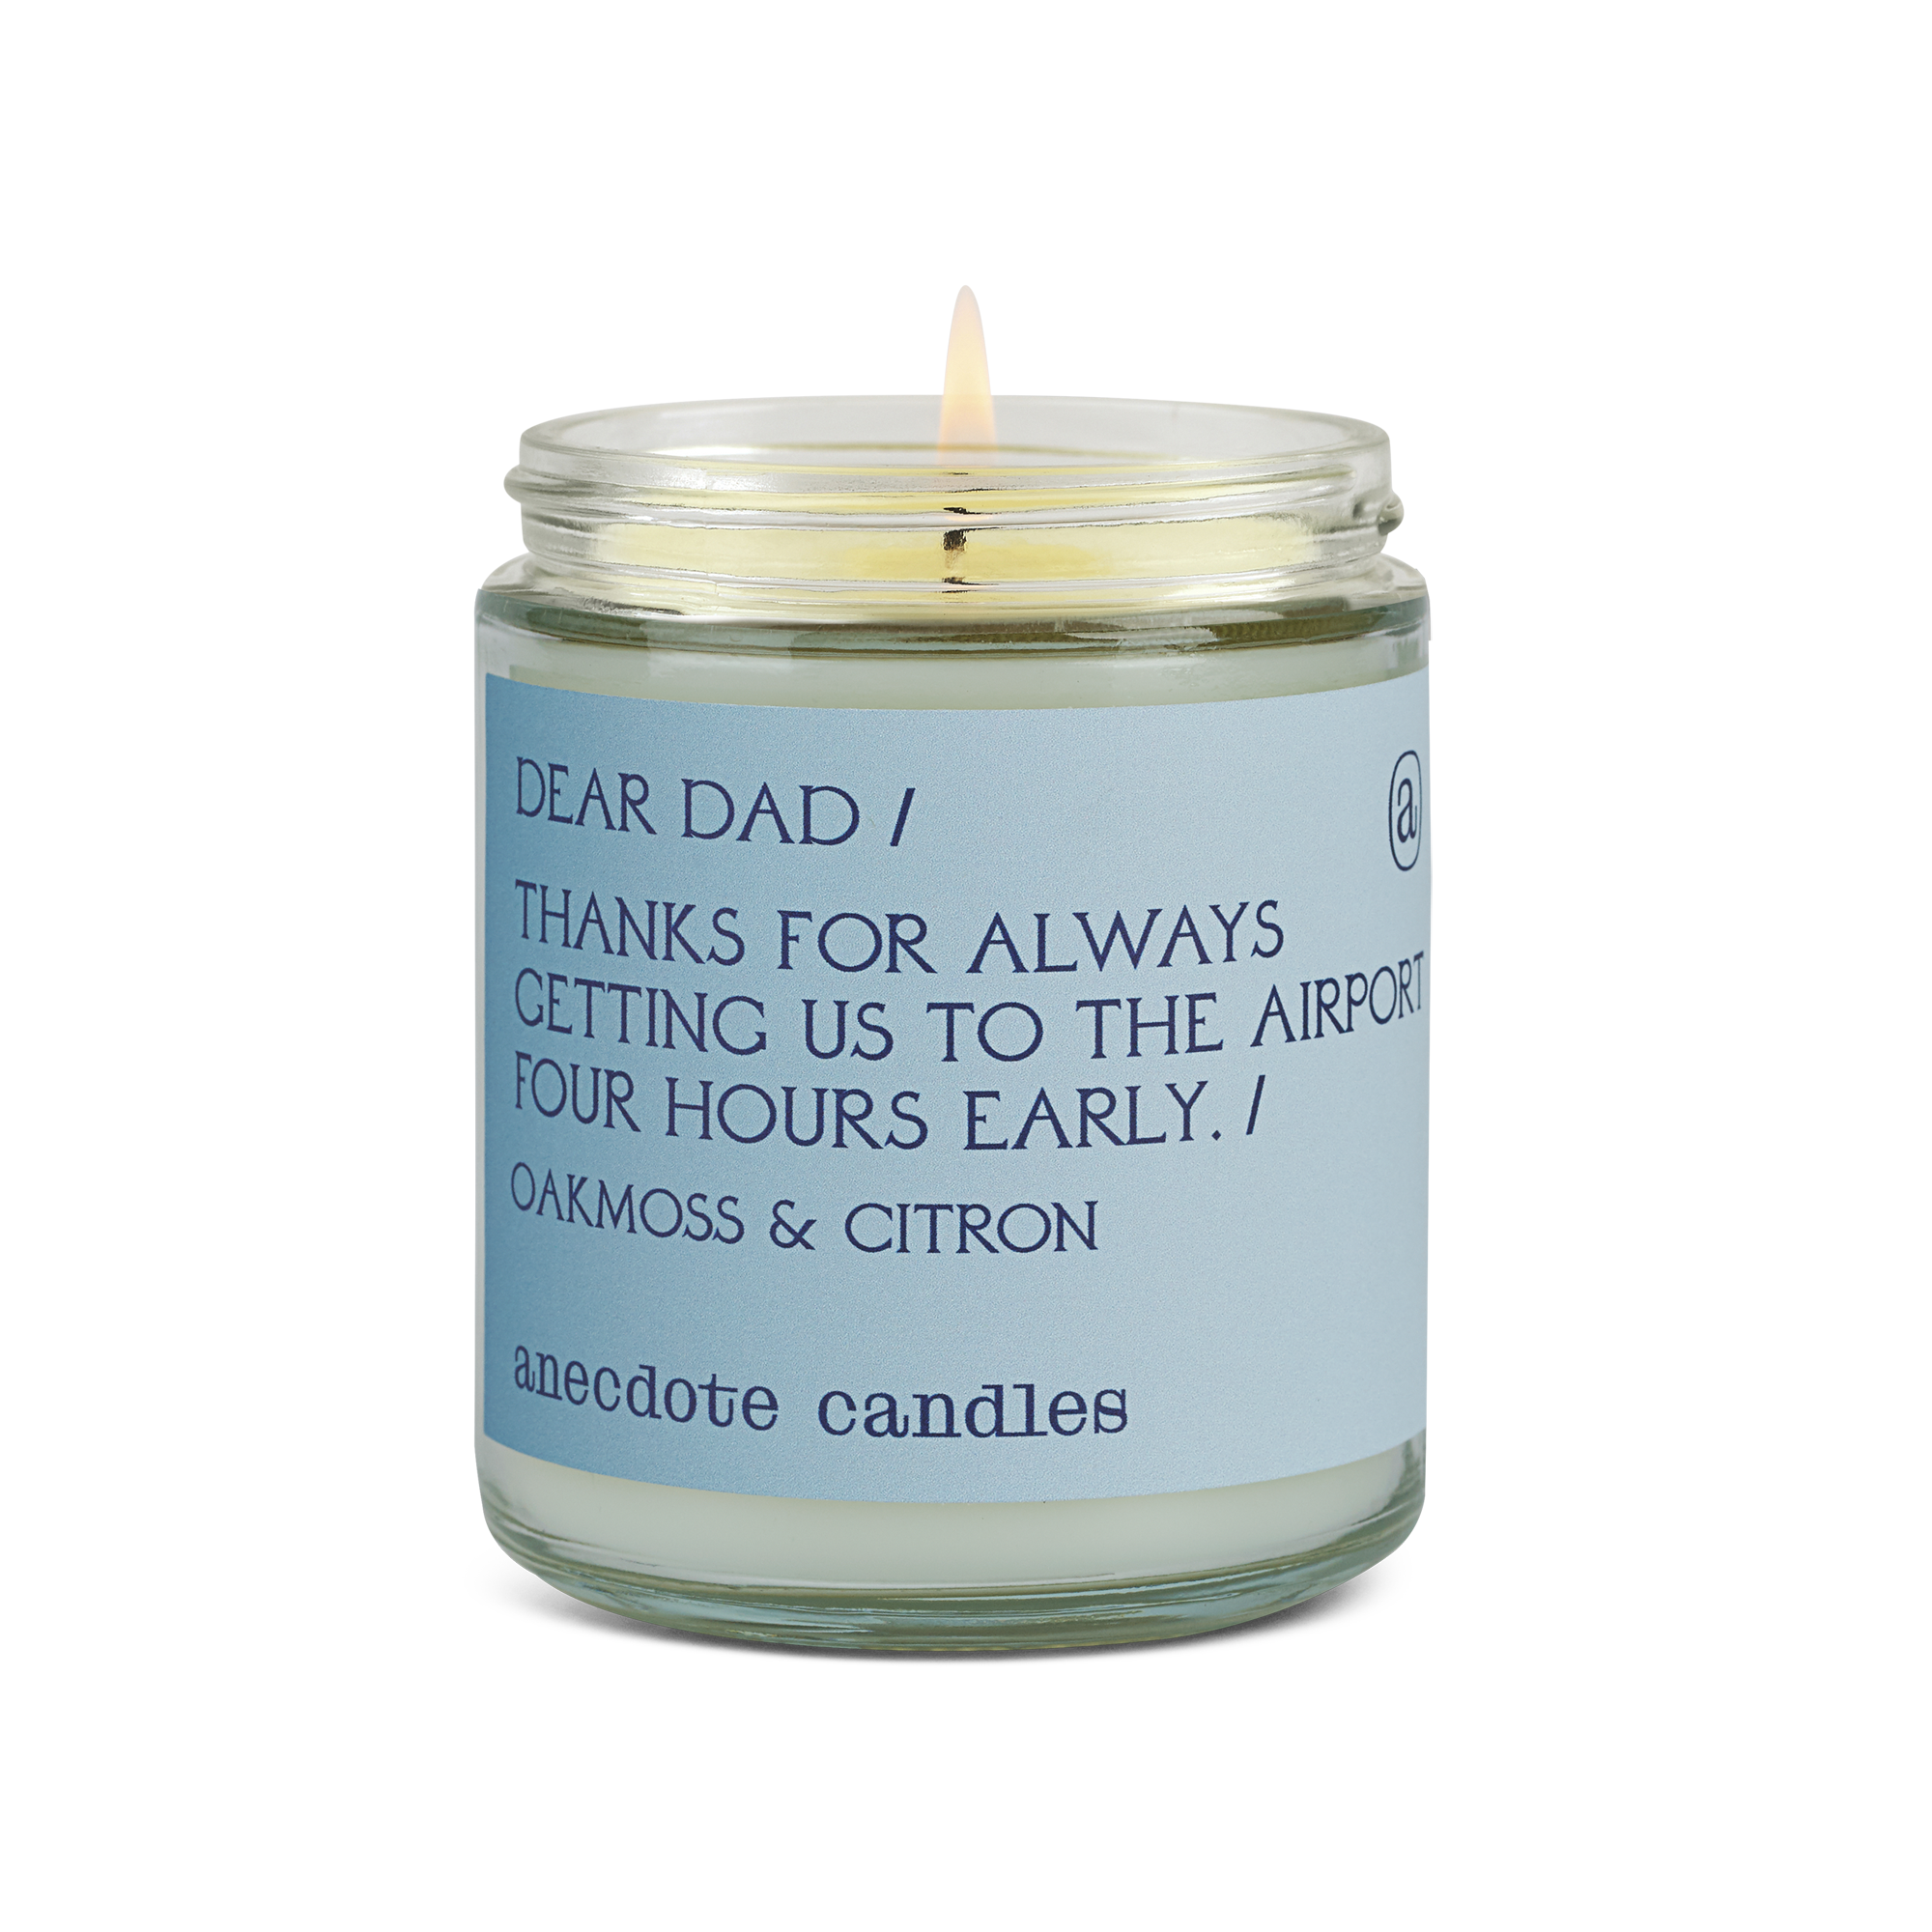 The Dear Dad Candle by Anecdote Candles